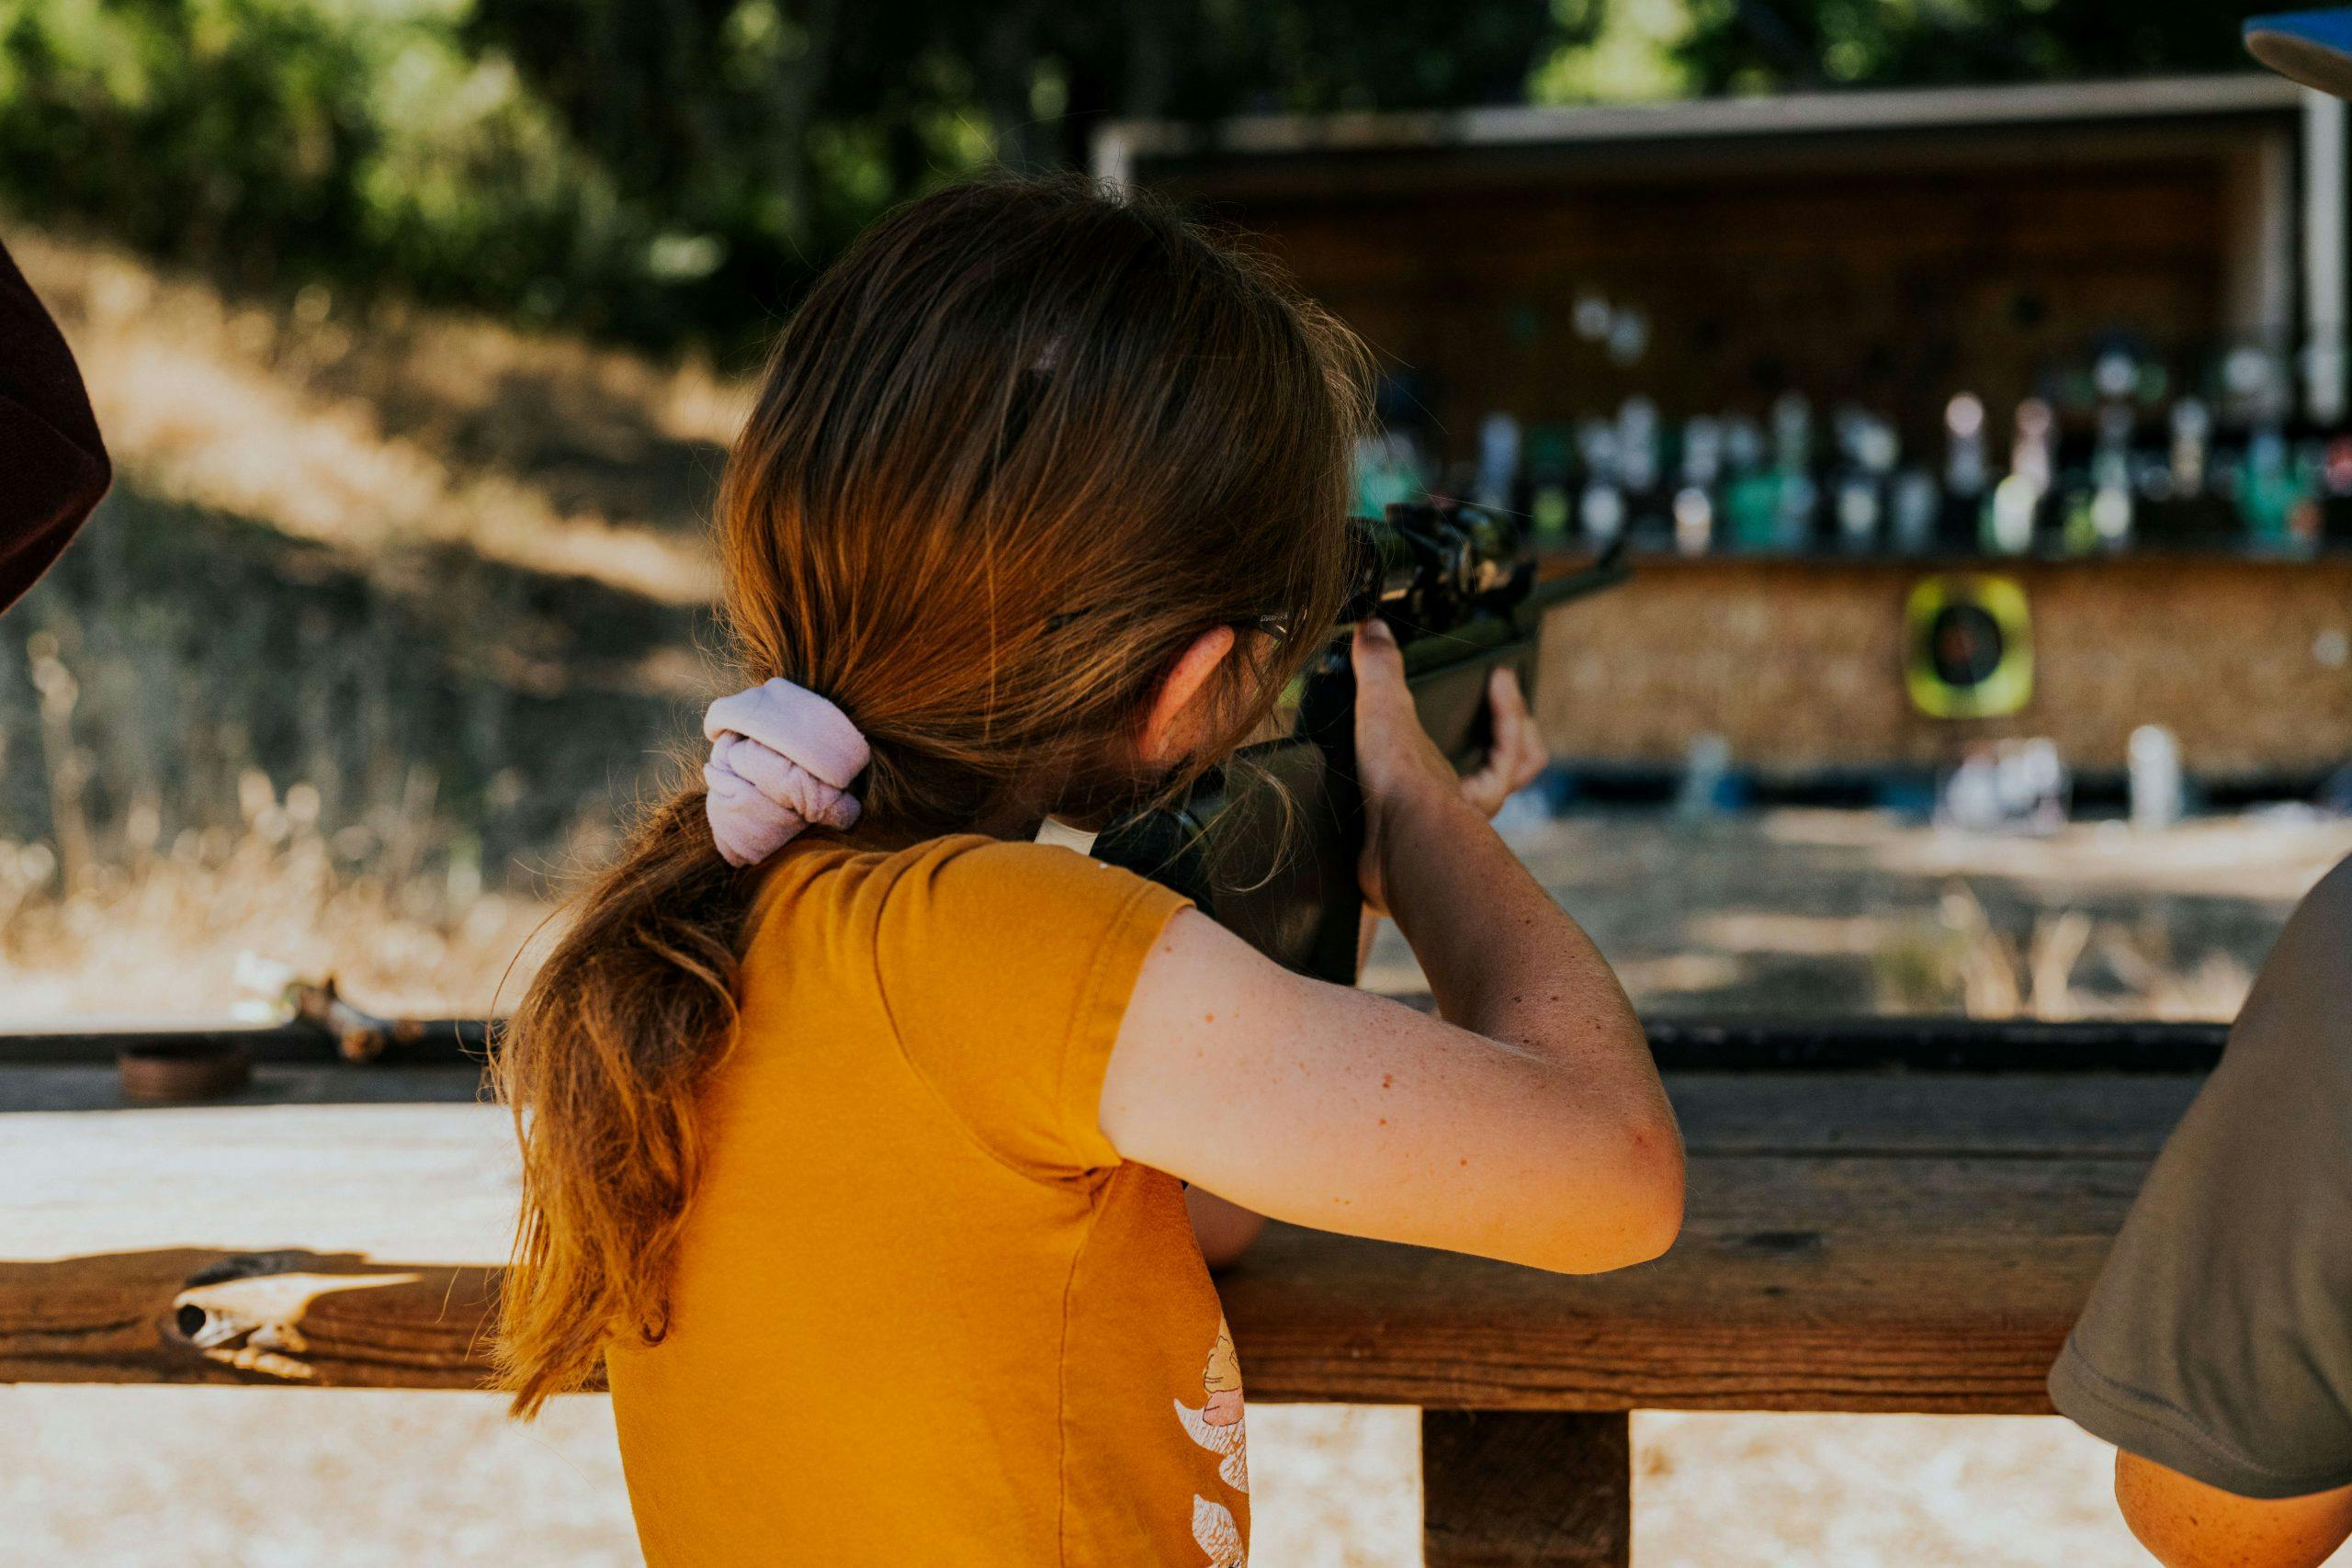 young person pointing an air rifle at a target